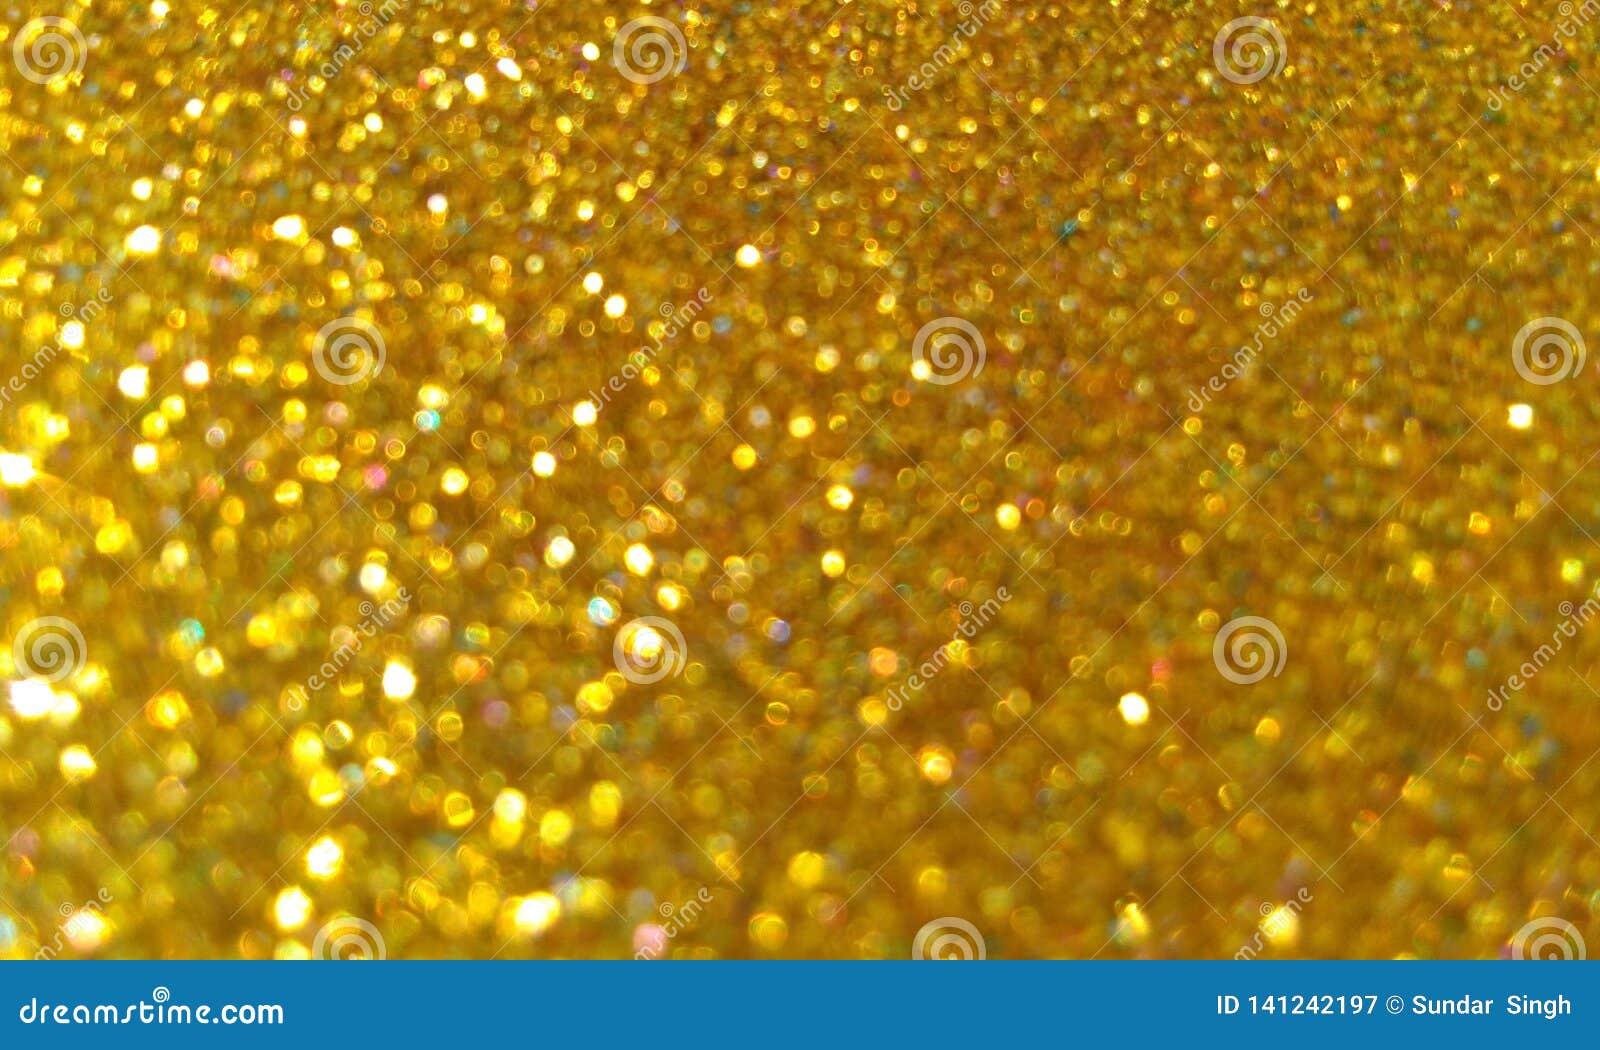 Pligt Bror Ulykke Gold Textured Background with Glitter Effect Background. Stock Image -  Image of color, blur: 141242197